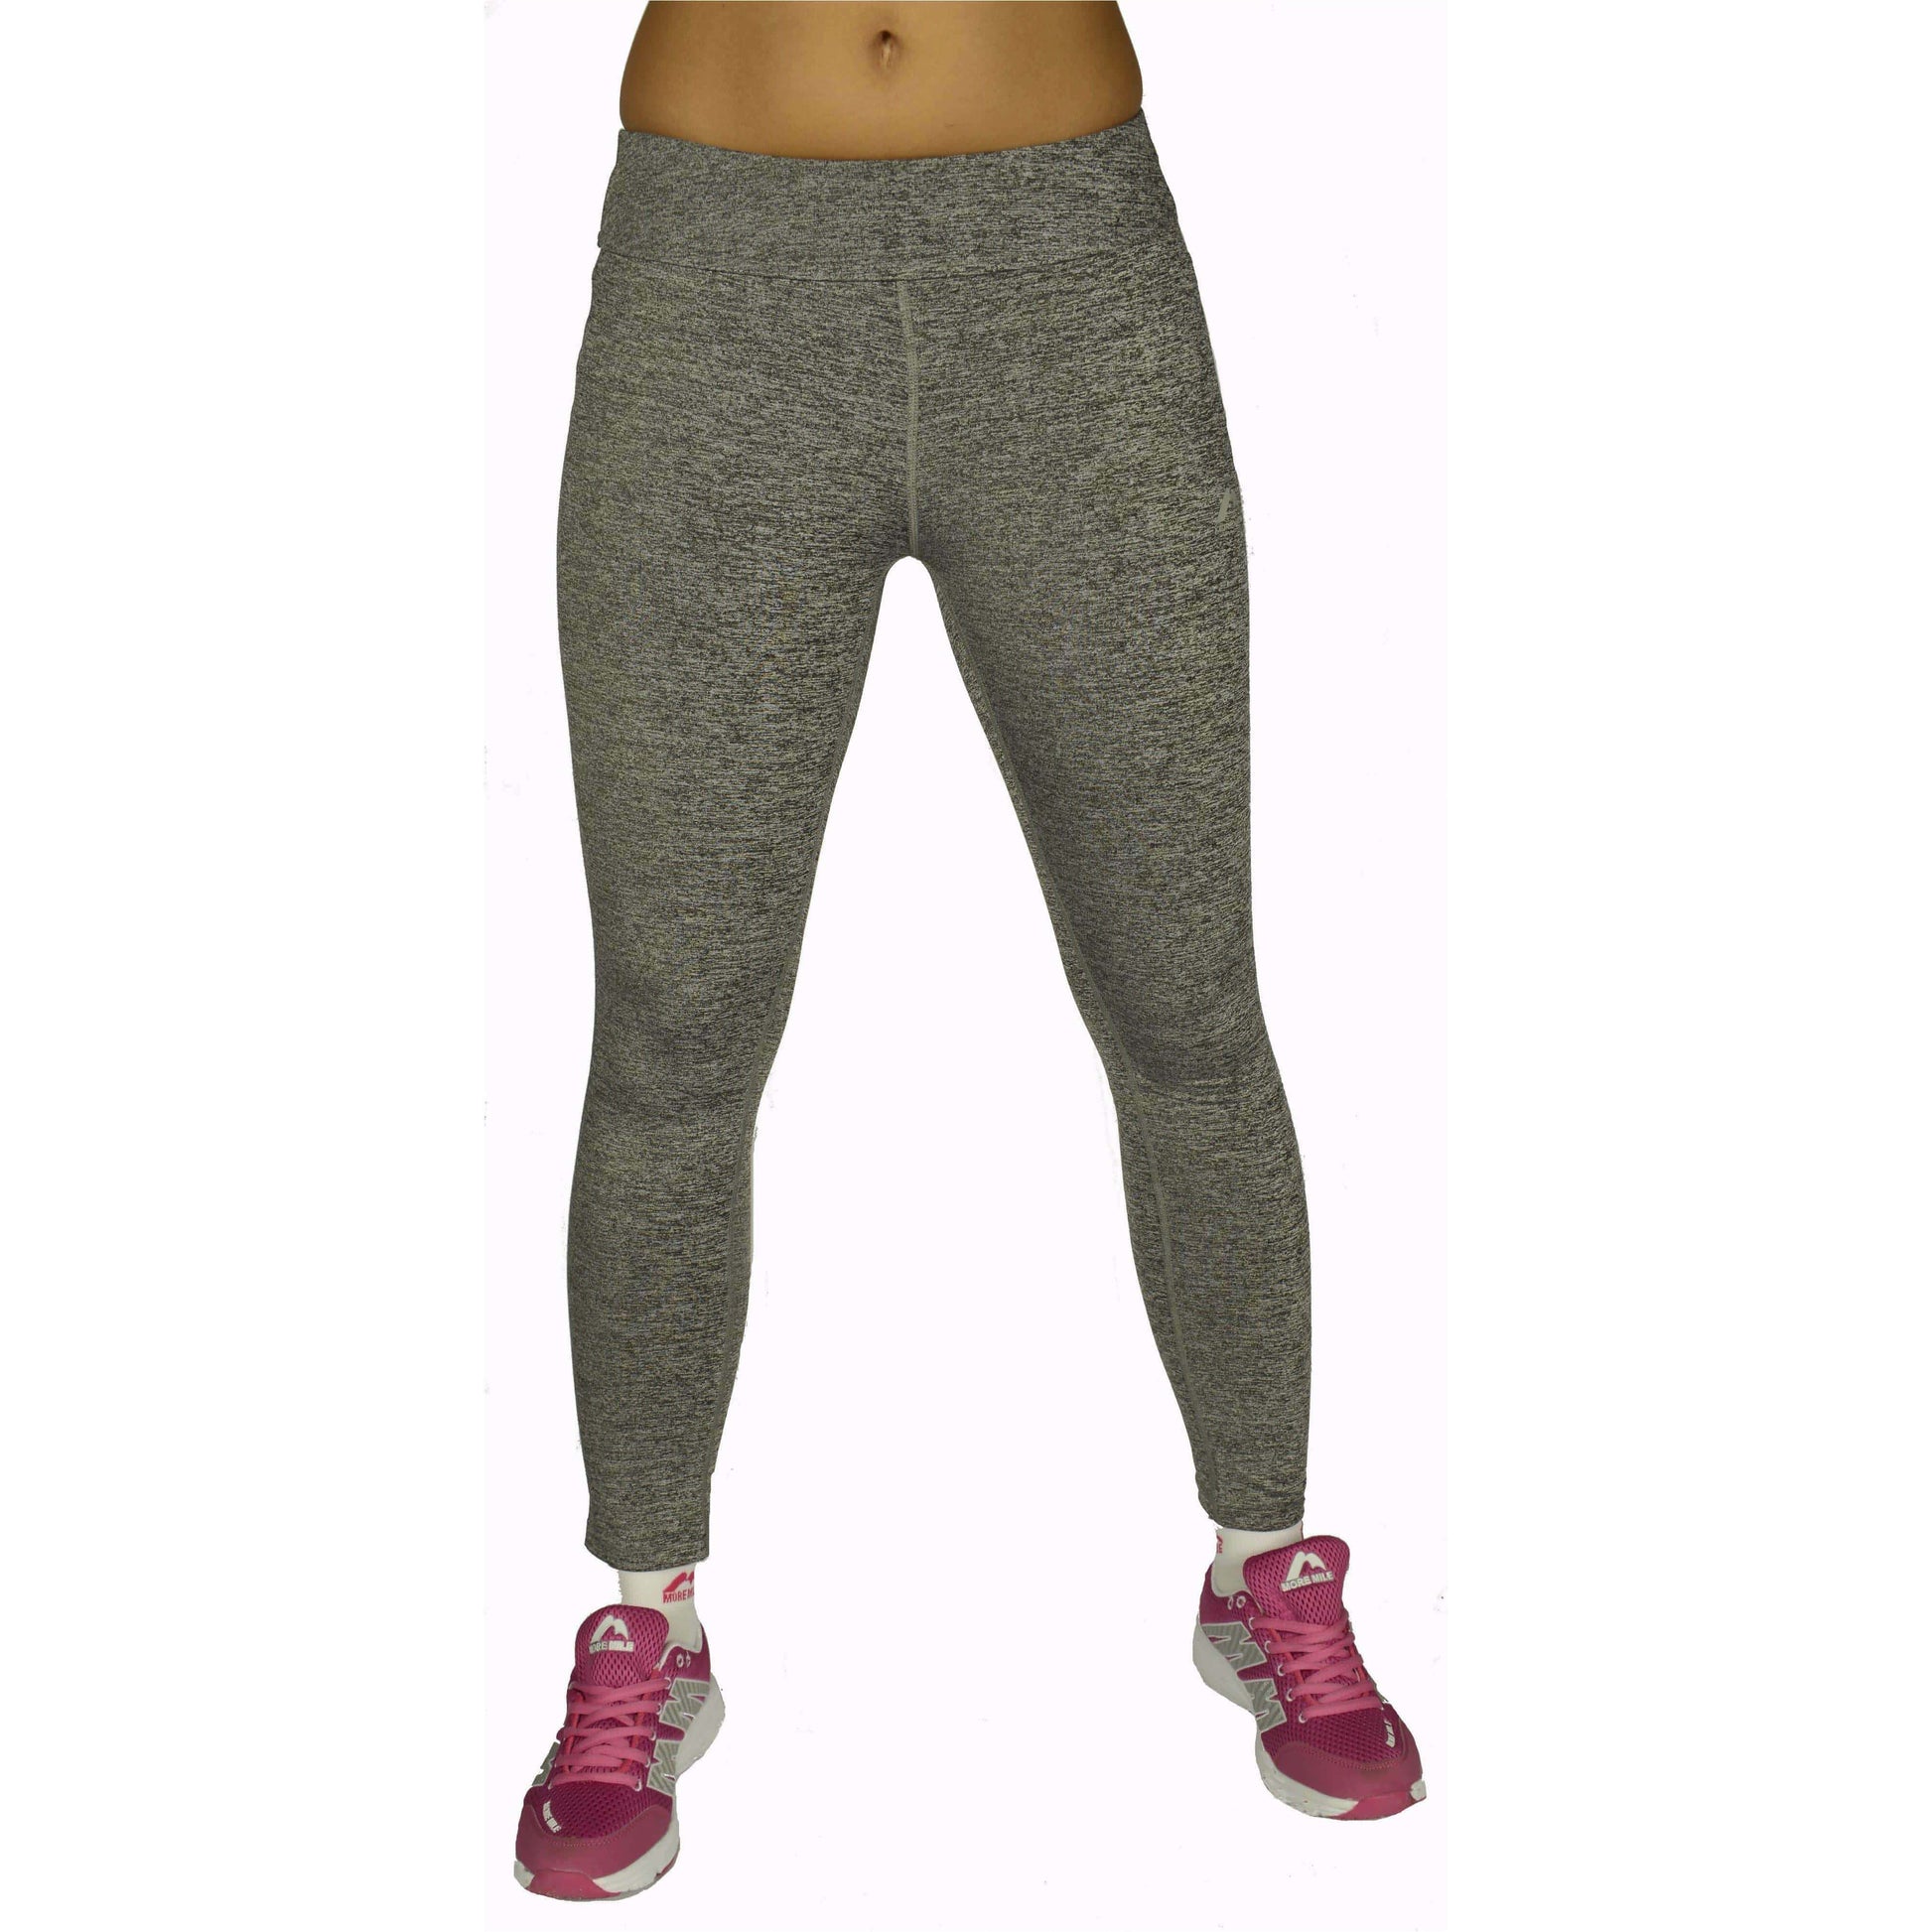 More Mile Heather Womens Training Pants - Grey 5055604328680 - Start Fitness